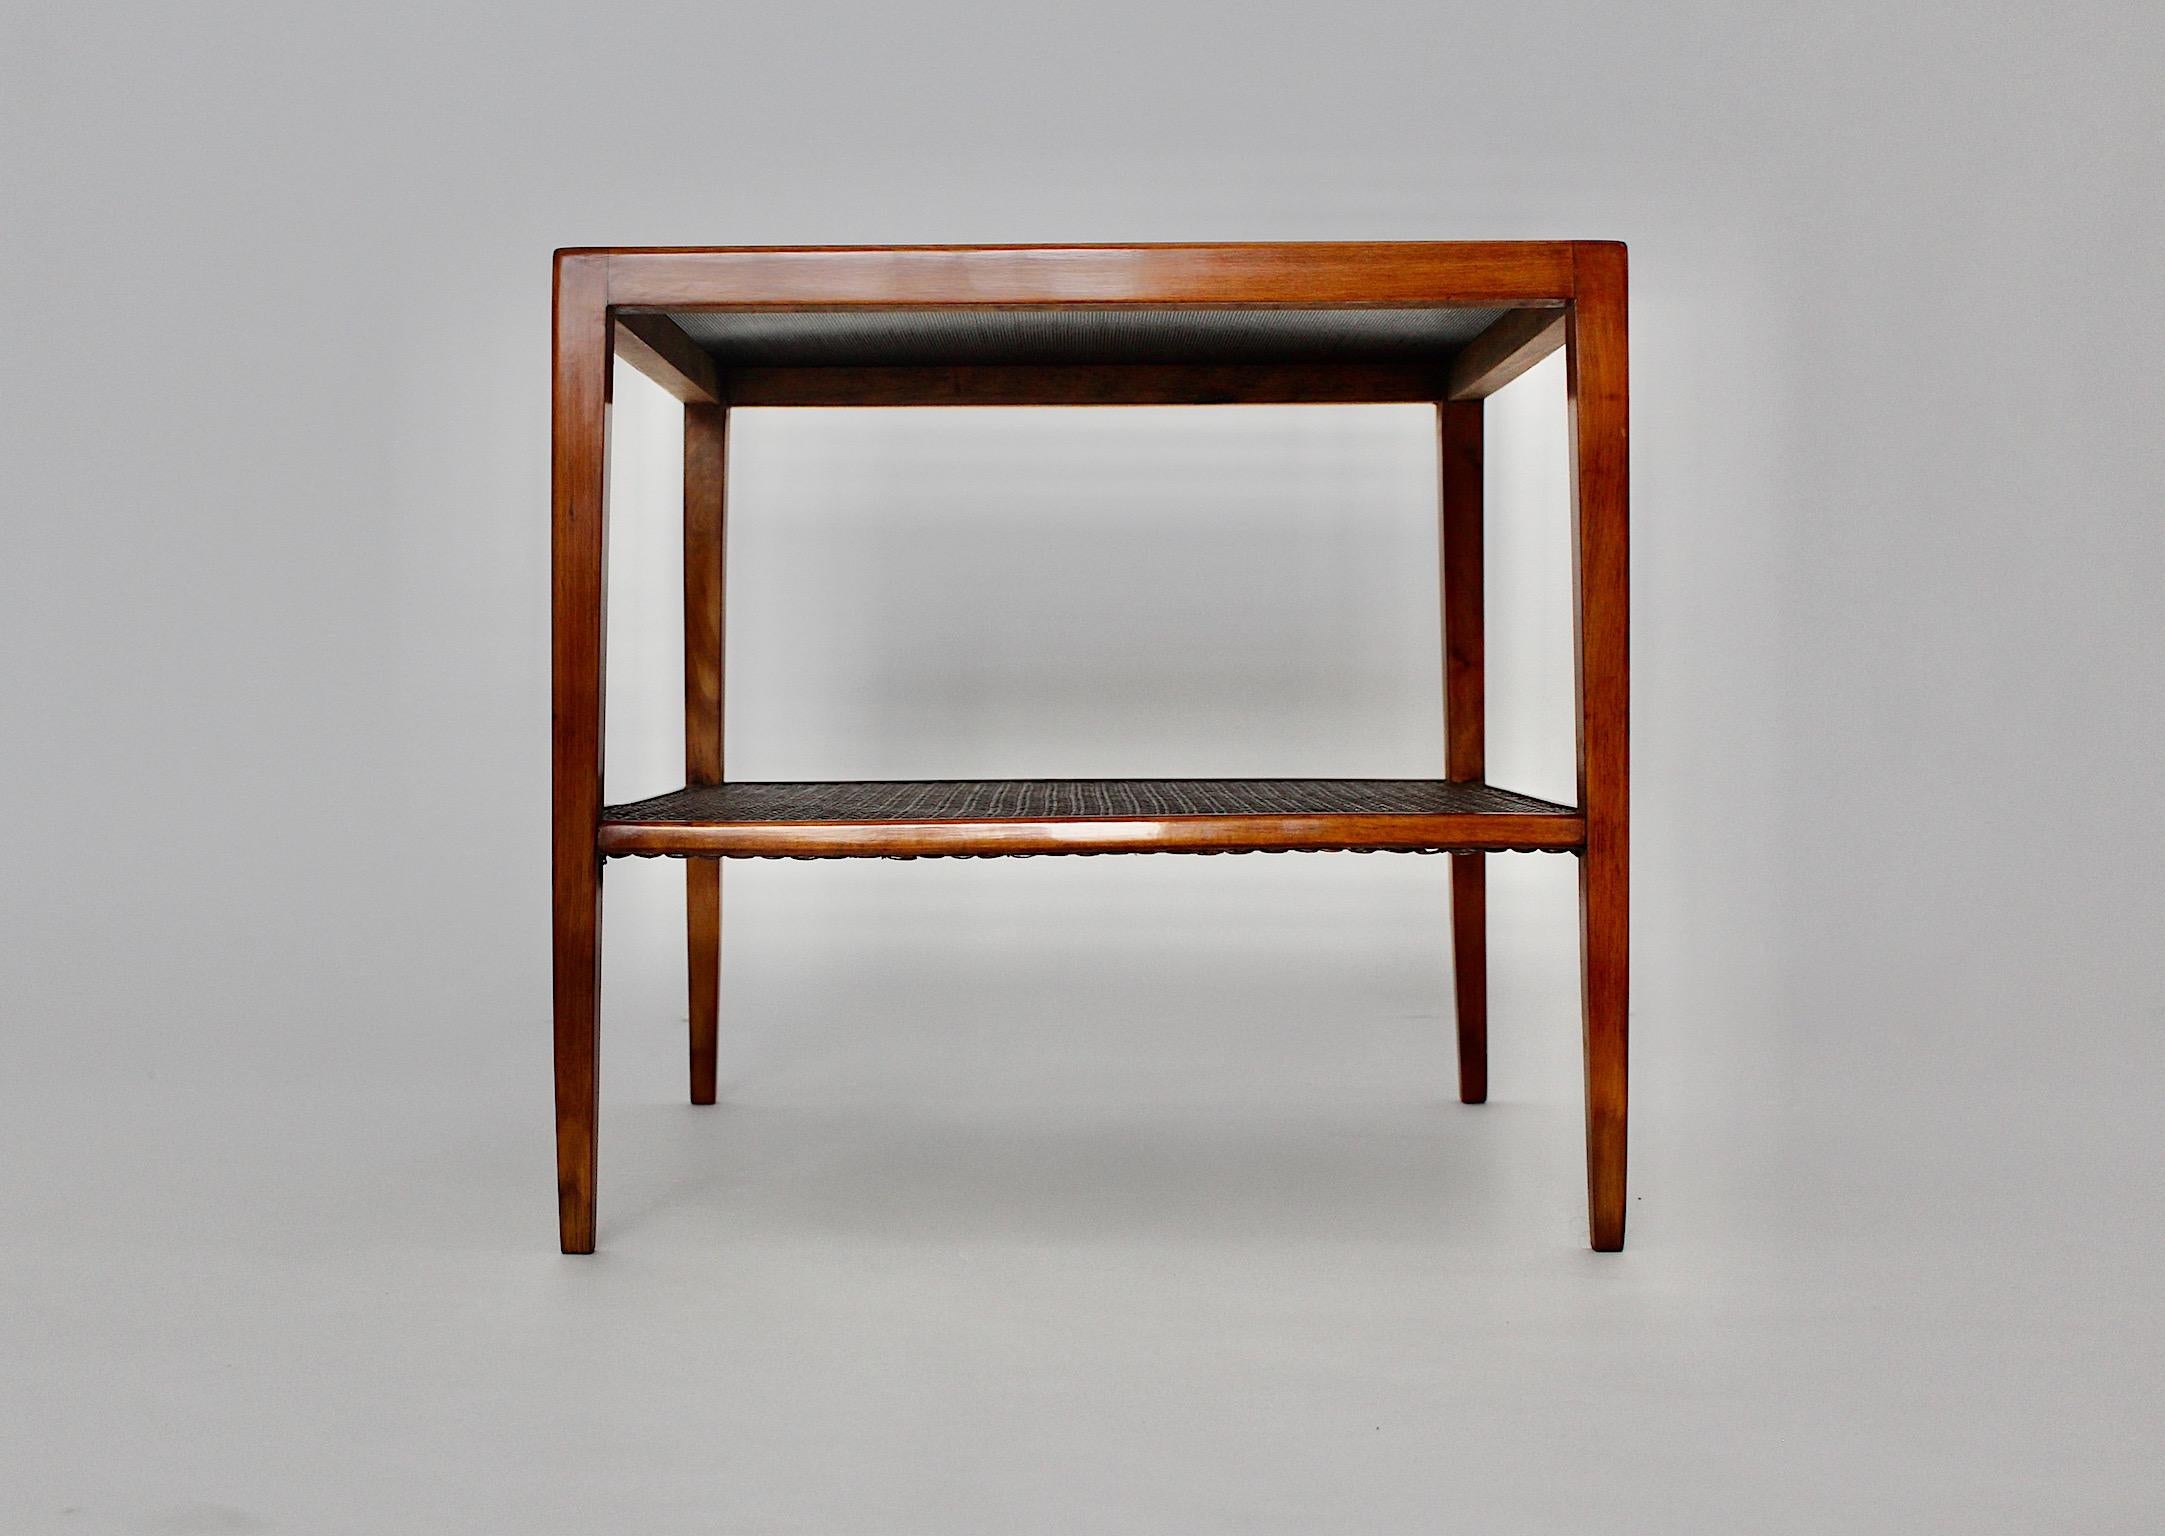 Julius Jirasek for Werkstätte Hagenauer vintage coffee table or side table, which was made of stained beech circa 1935, Vienna.
A very elegant and sleek vintage two tiered coffee table or side table M 6073 by Julius Jirasek for workshop Hagenauer